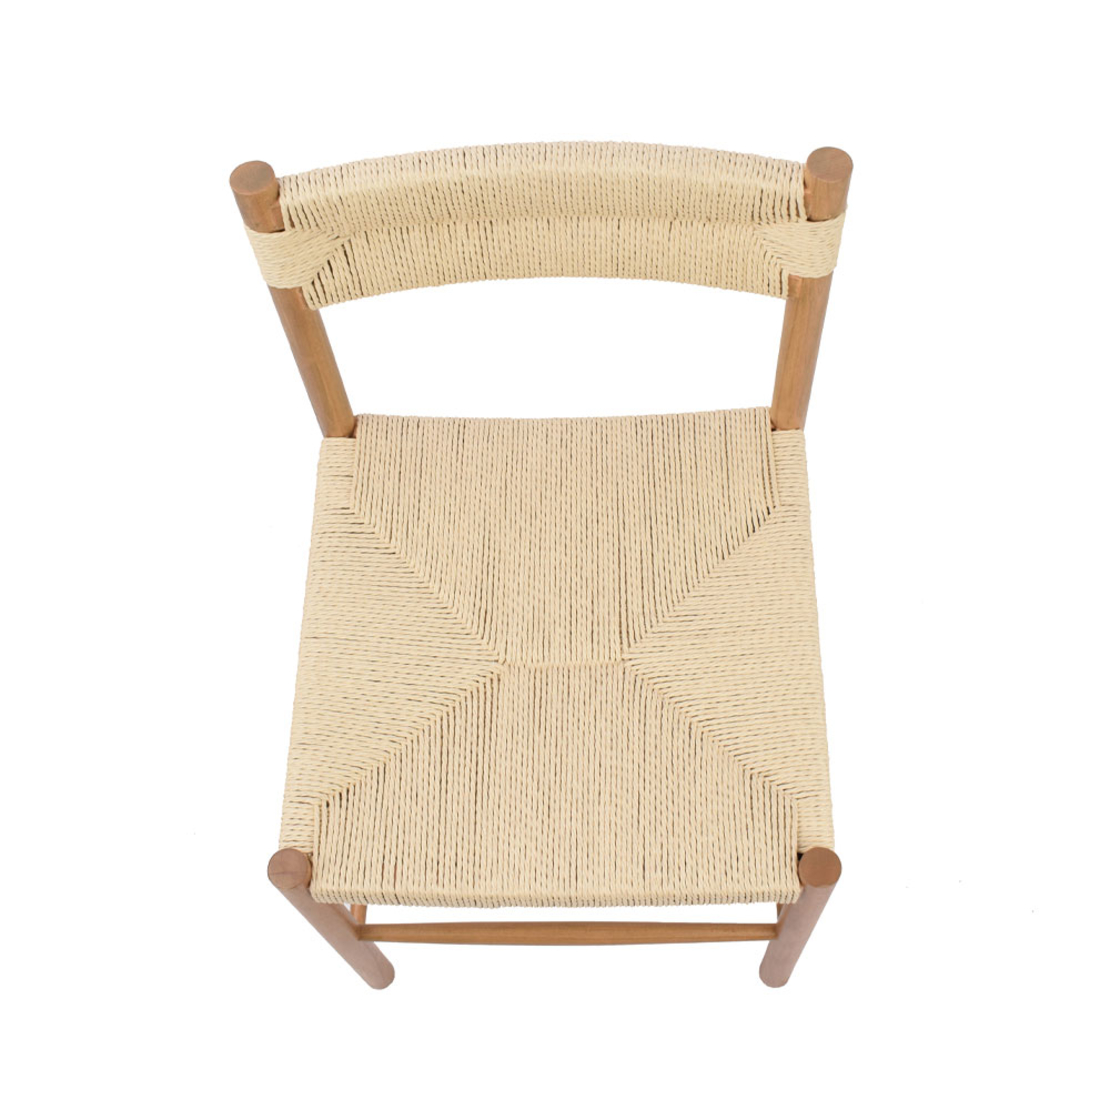 CABO CHAIR SOLID WOOD RUBBERWOOD NATURAL ROPE PRC